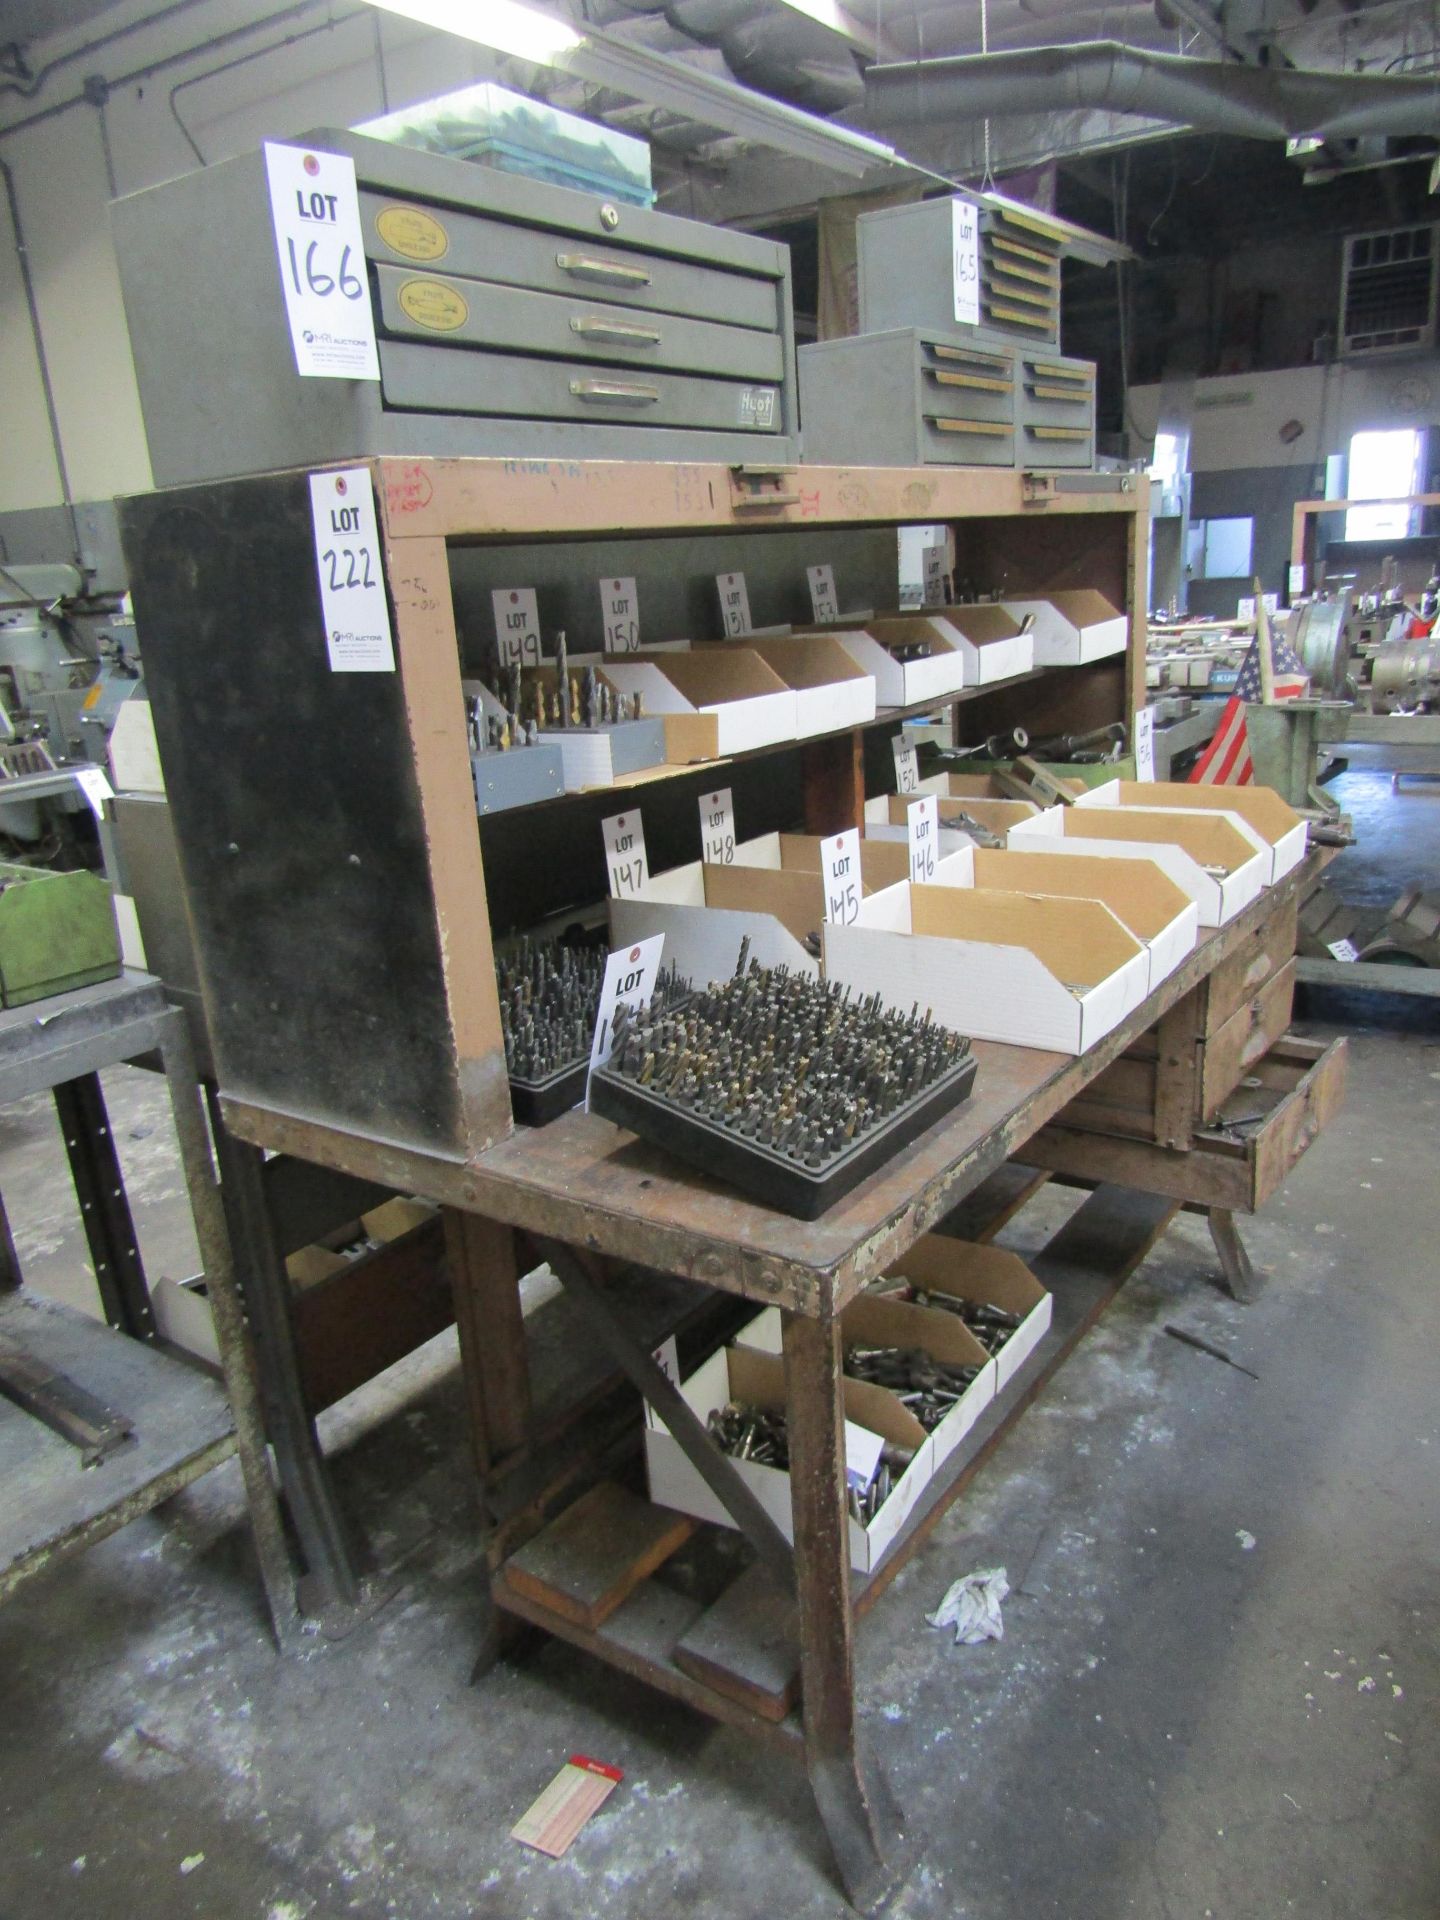 LOT TO INCLUDE: (1) GRANITE INSPECTION TABLE, DIMENSIONS: 24" X 18" X 34"H, (3) SHOP TABLES